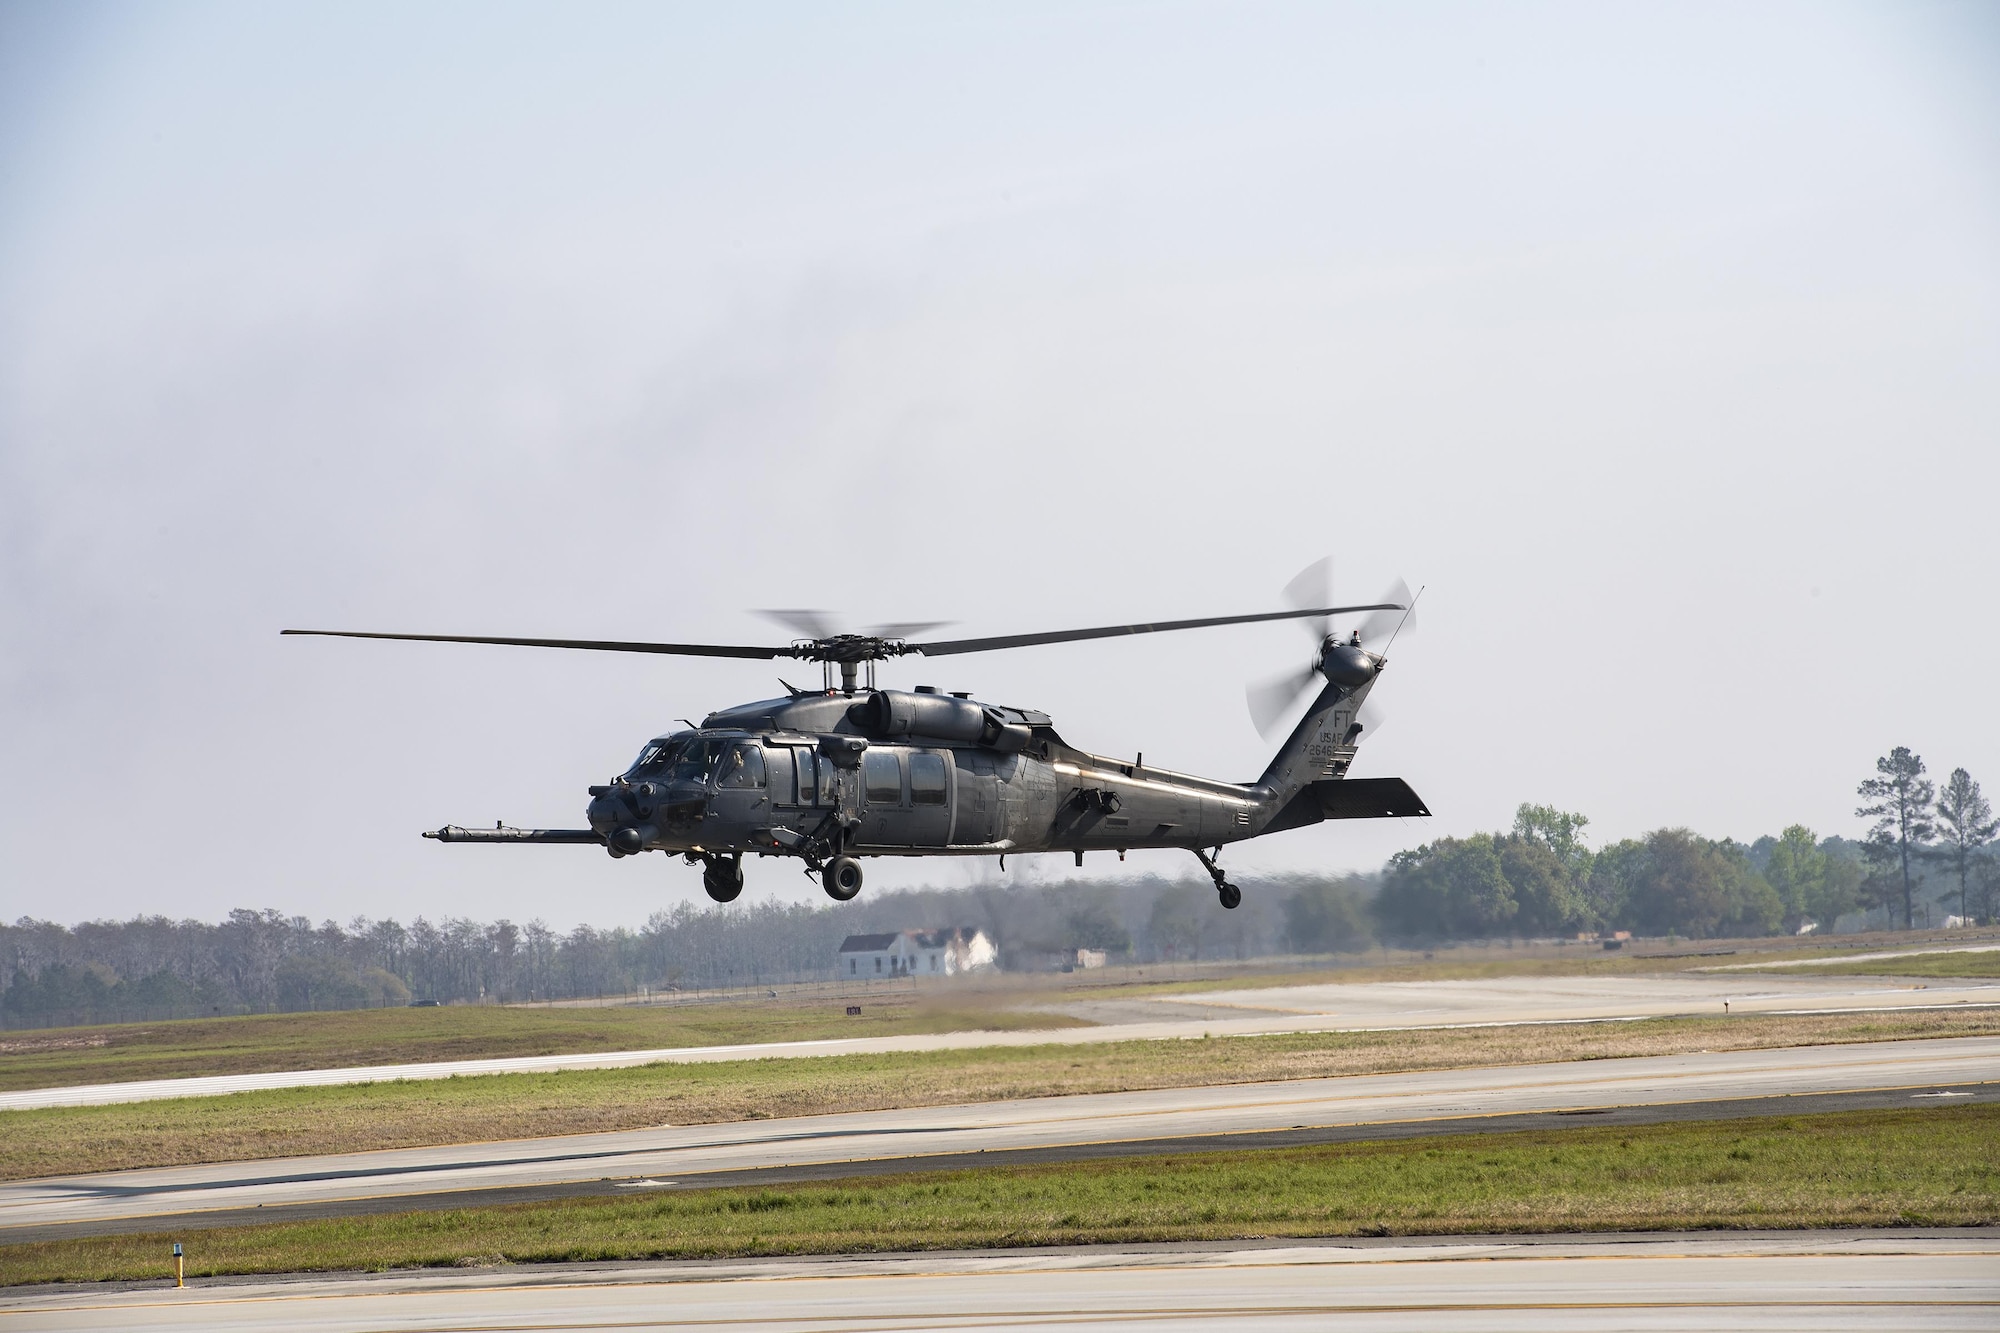 An HH-60G Pave Hawk hovers near the flightline, March 22, 2017, at Moody Air Force Base, Ga. The 41st HMU is responsible for Moody’s Pave Hawk fleet. Through innovation and preventative maintenance, they ensure each of their 13 Pave Hawks receive the upkeep needed to accomplish the mission. (U.S. Air Force photo by Airman 1st Class Janiqua P. Robinson)